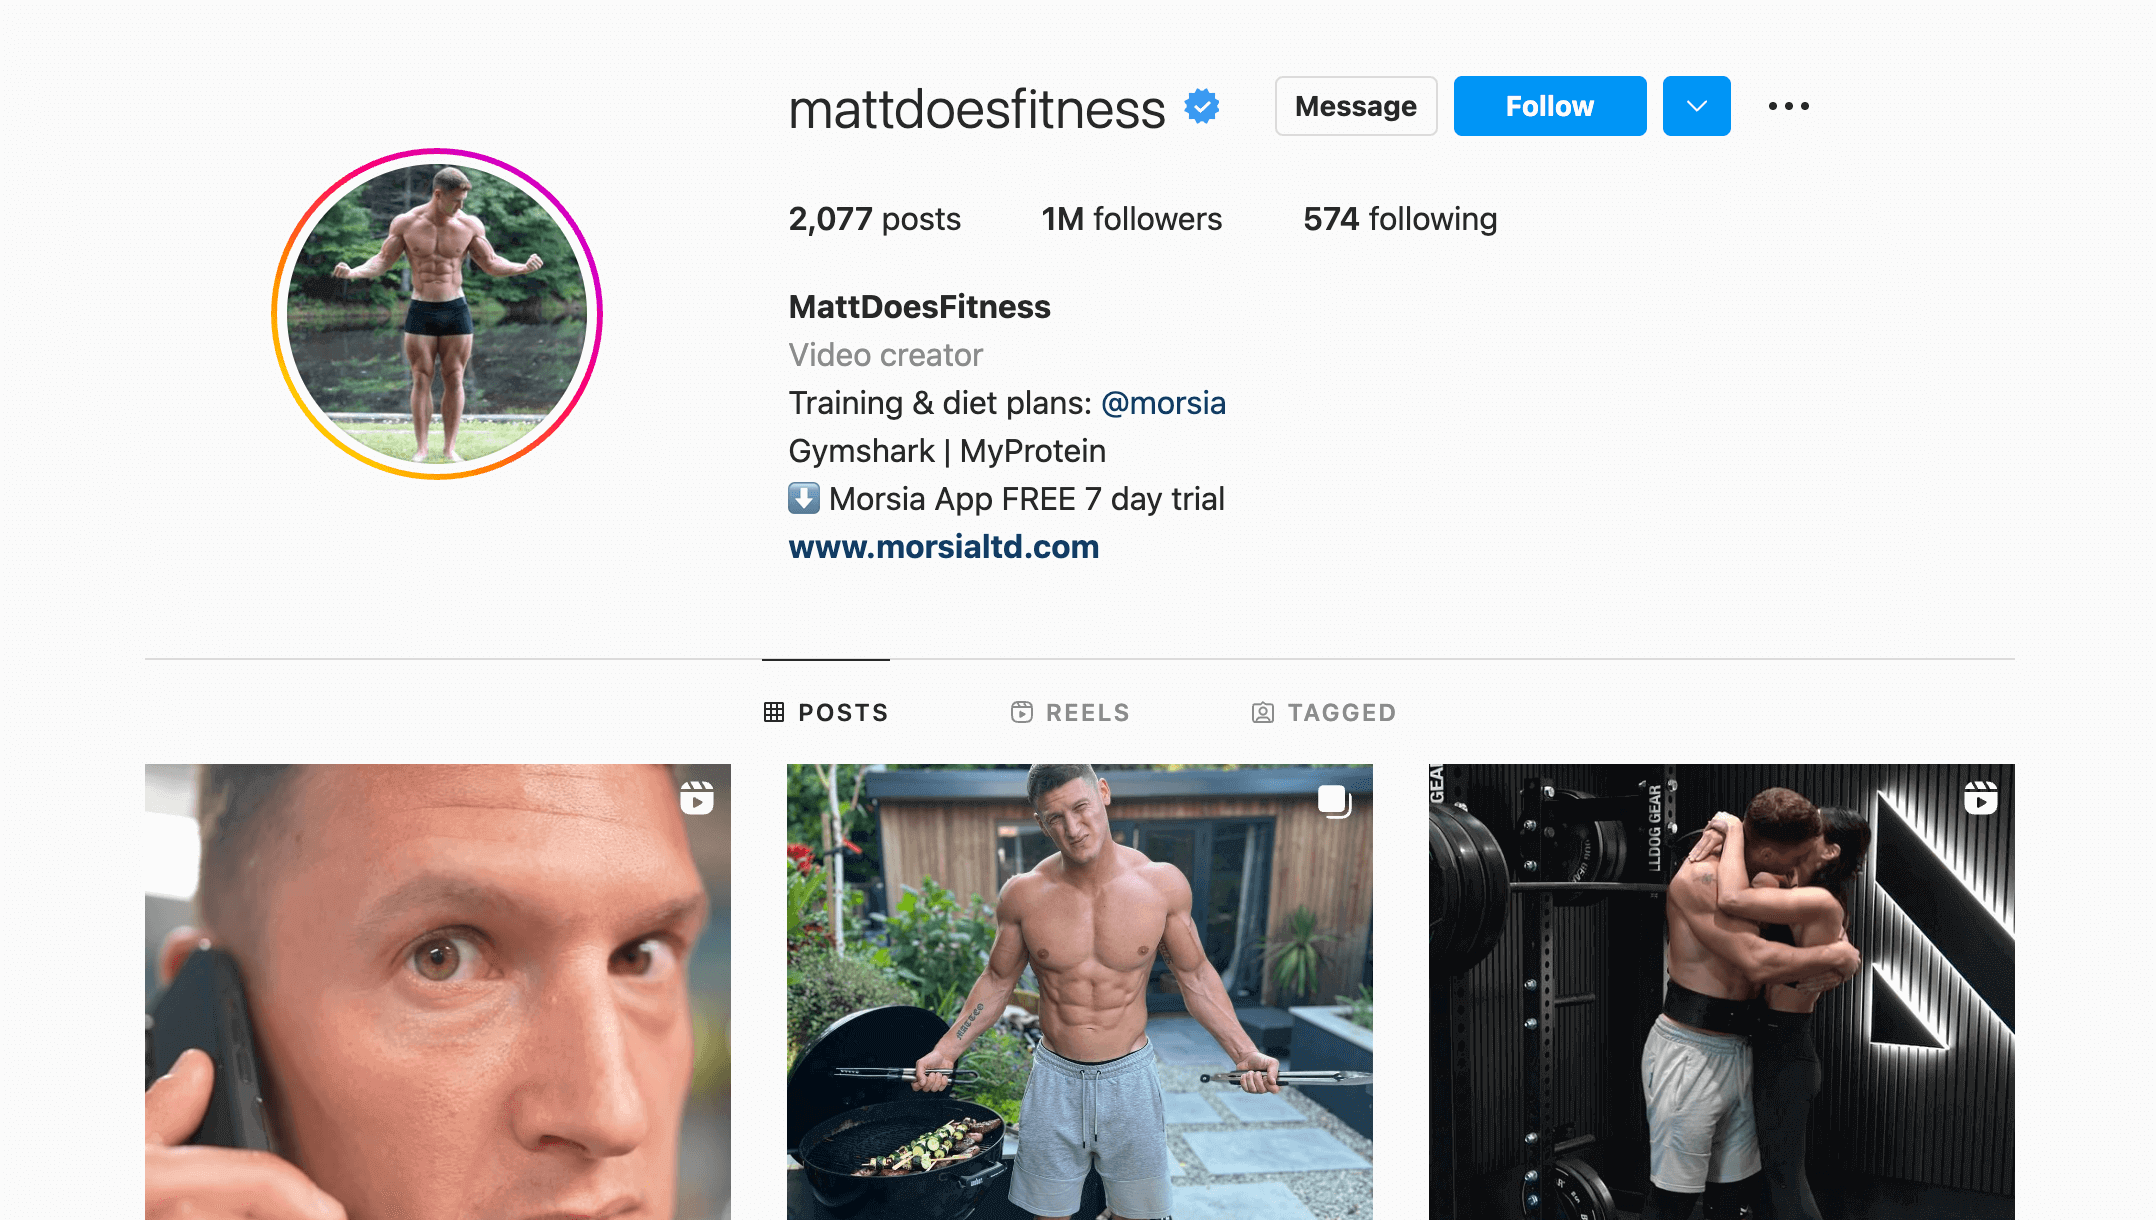 Example of a brand ambassador: MattDoesFitness for Gymshark and MyProtein